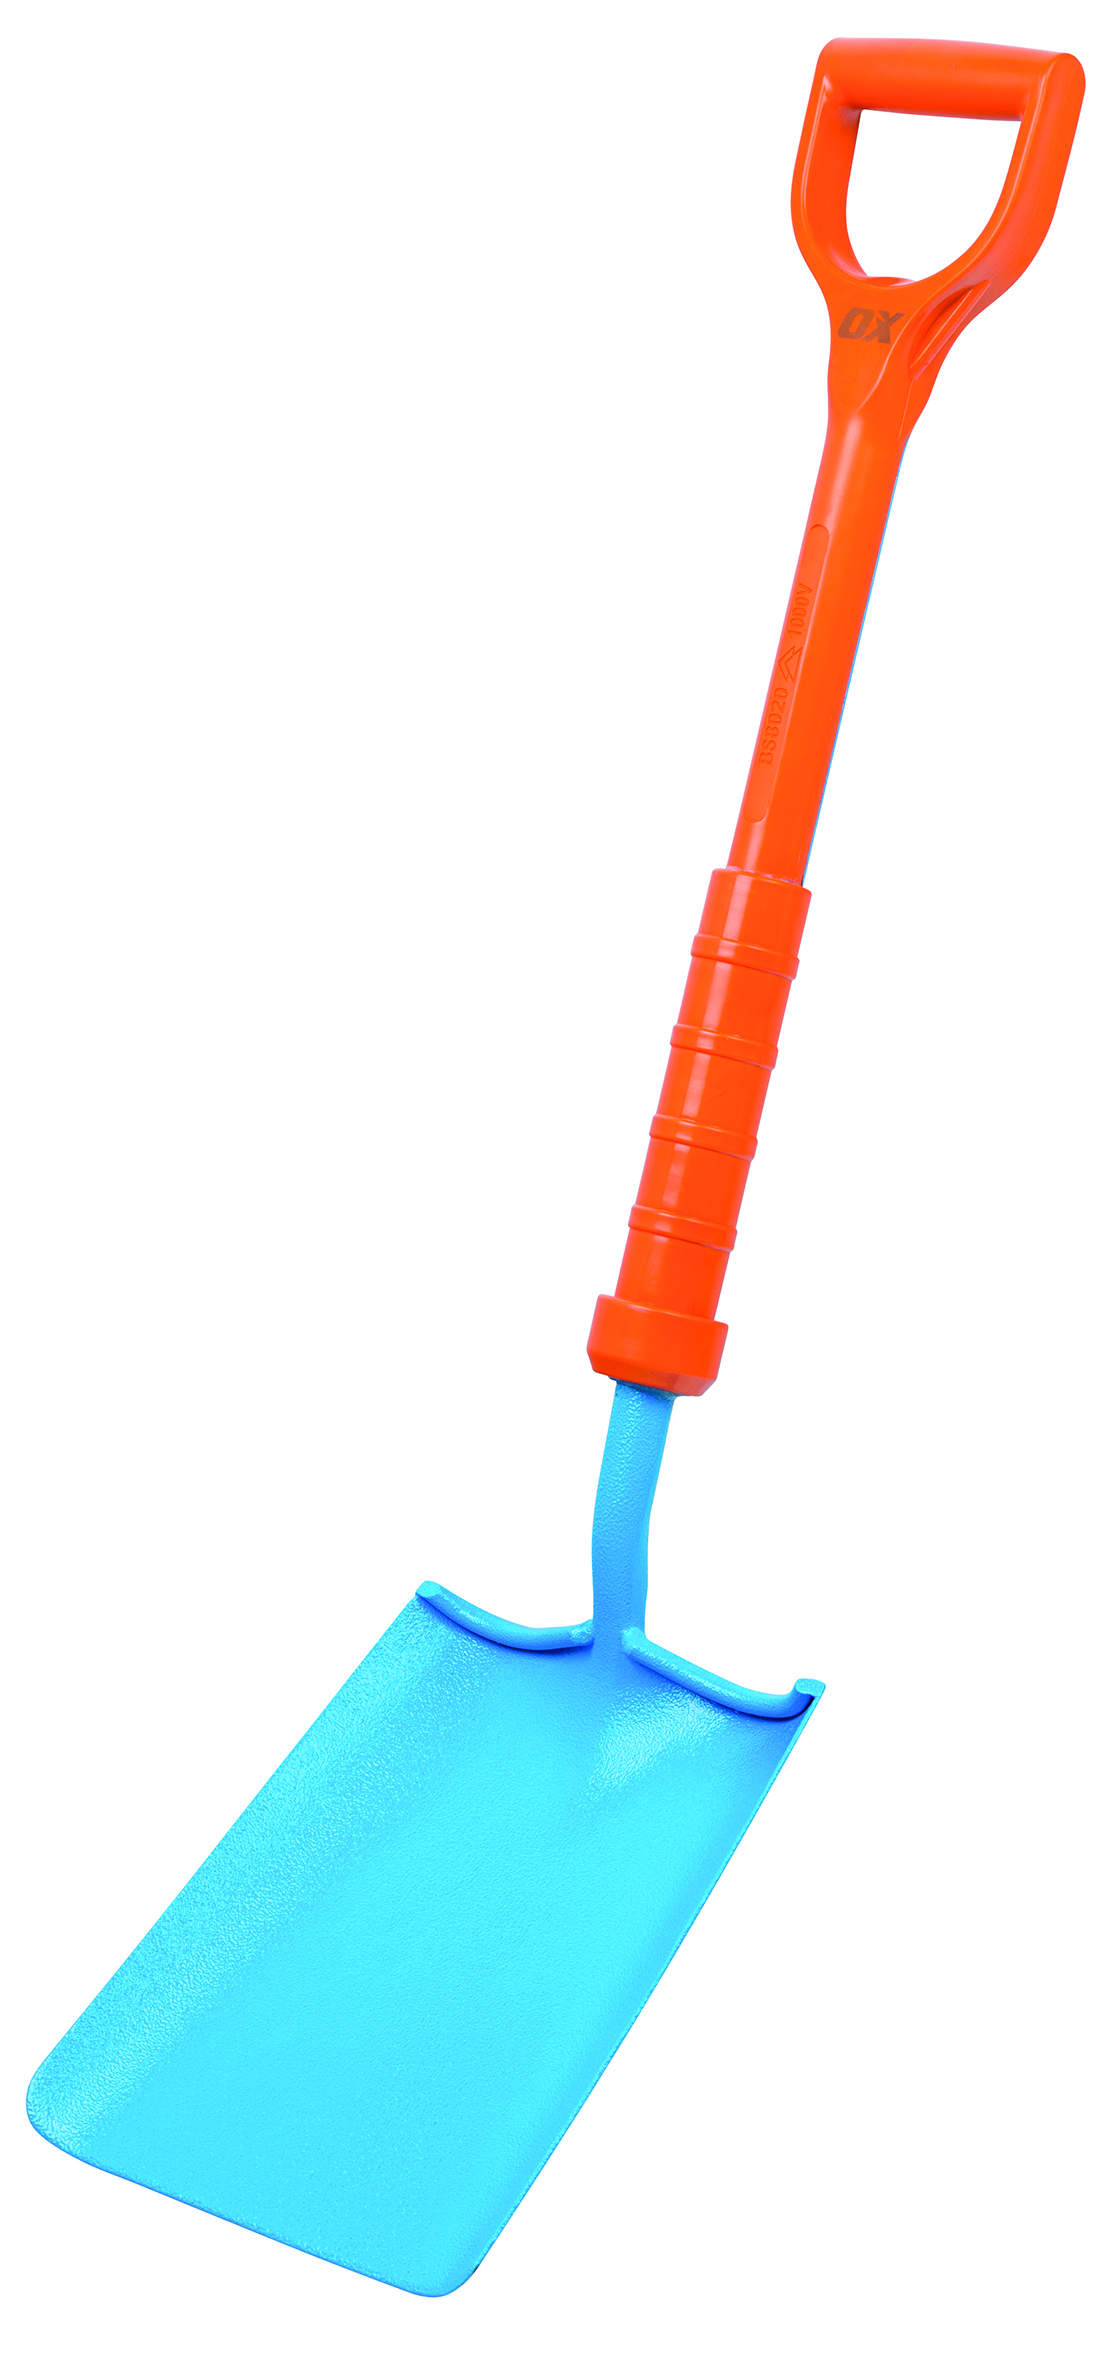 OX Pro Insulated Square Mouth Shovel